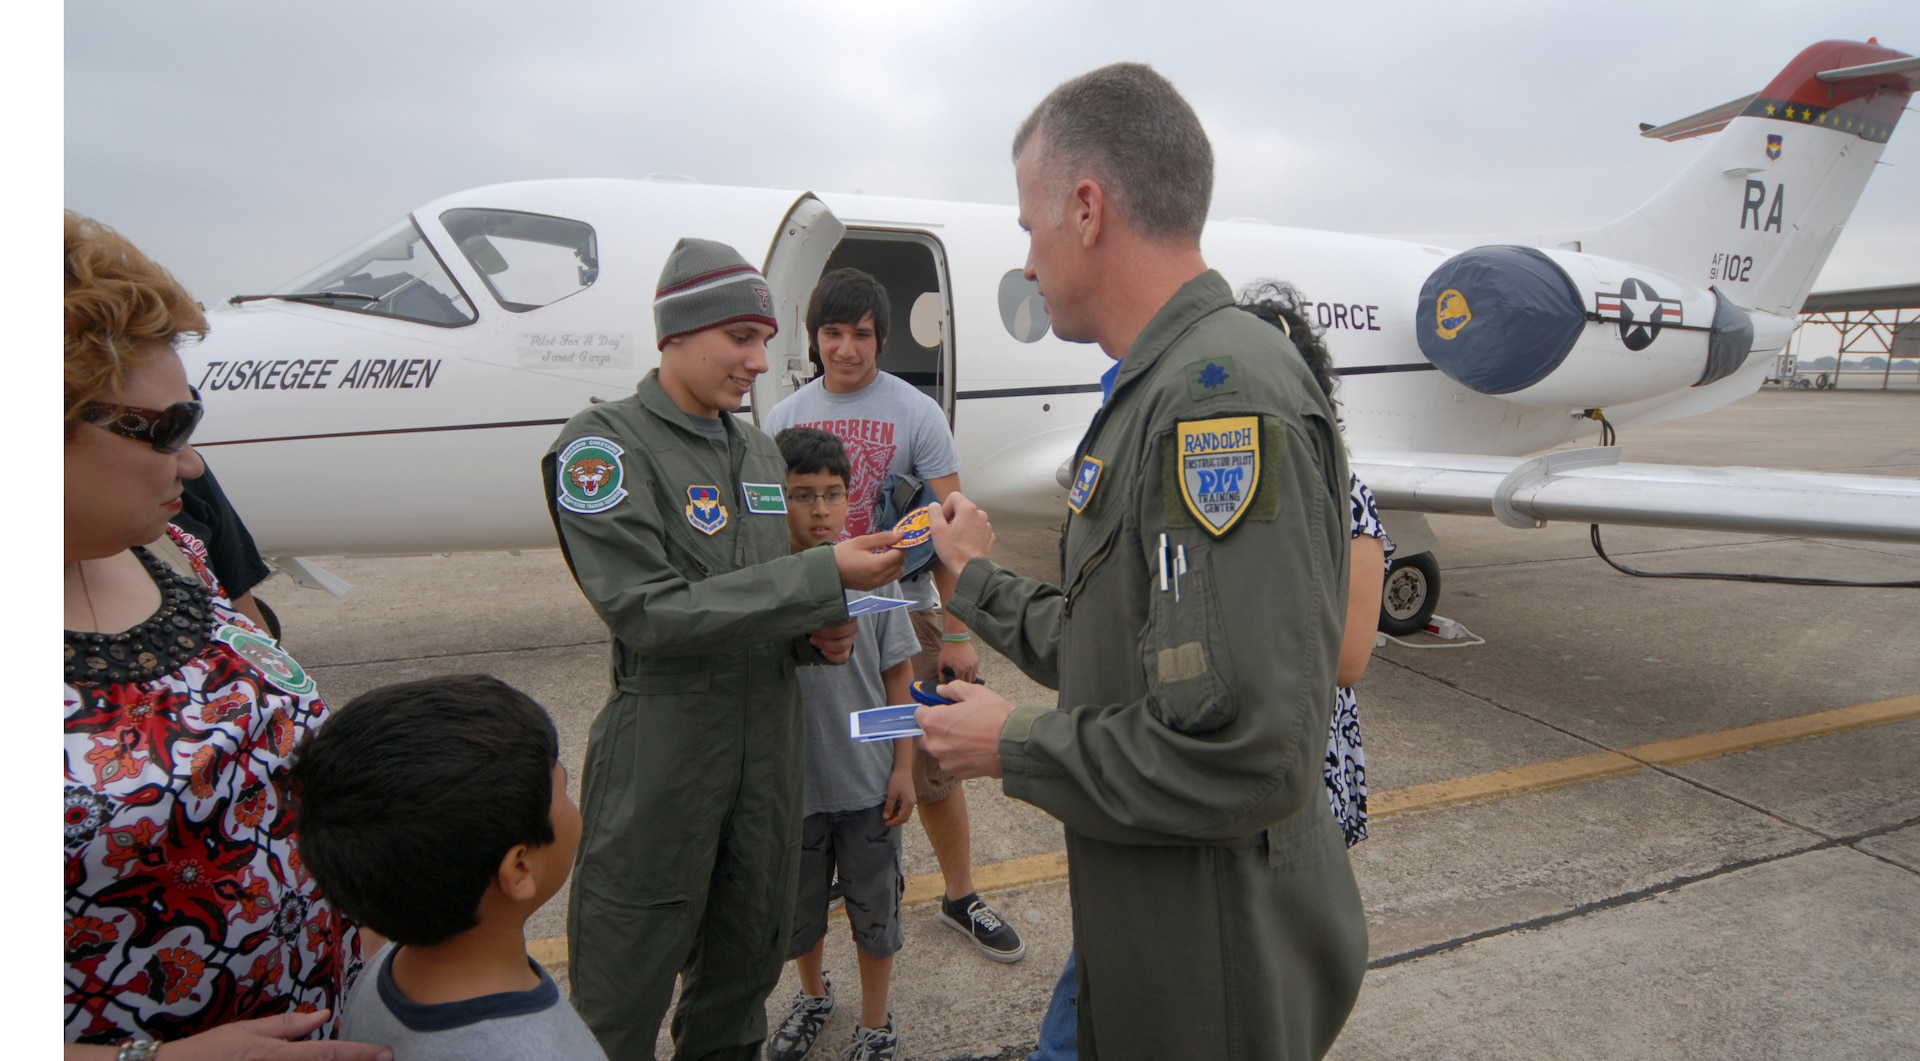 Lt. Col. Bill Lockhart, 99th Flying Training Squadron, gives Jared Garza a squadron patch during Pilot for a Day. (U.S. Air Force photo by Steve White)